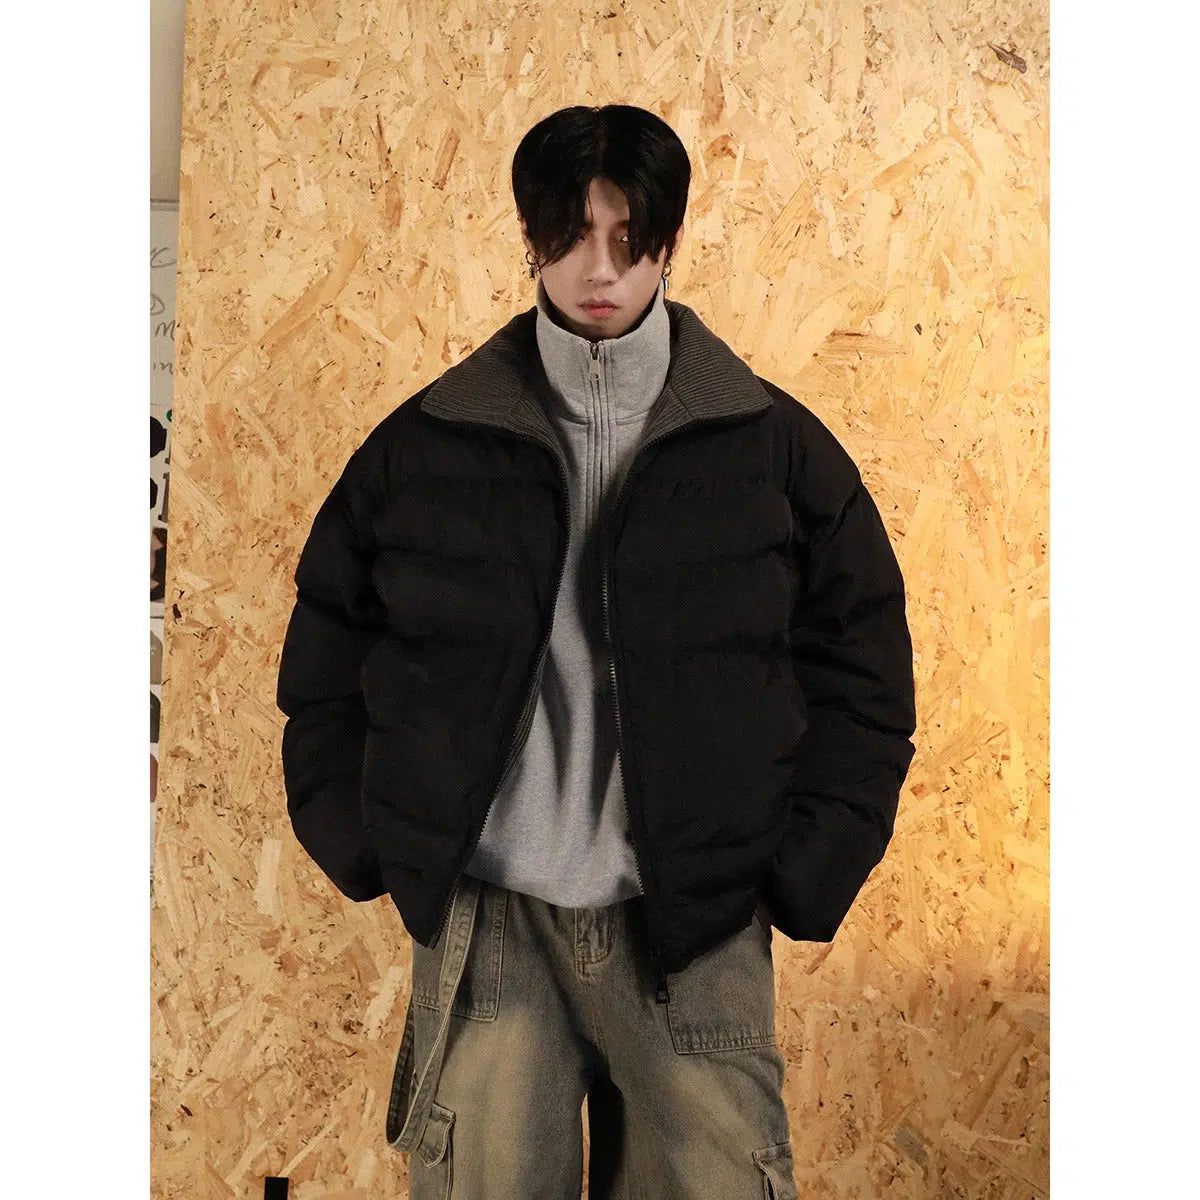 Pleated Loose Puffer Jacket Korean Street Fashion Jacket By Mr Nearly Shop Online at OH Vault